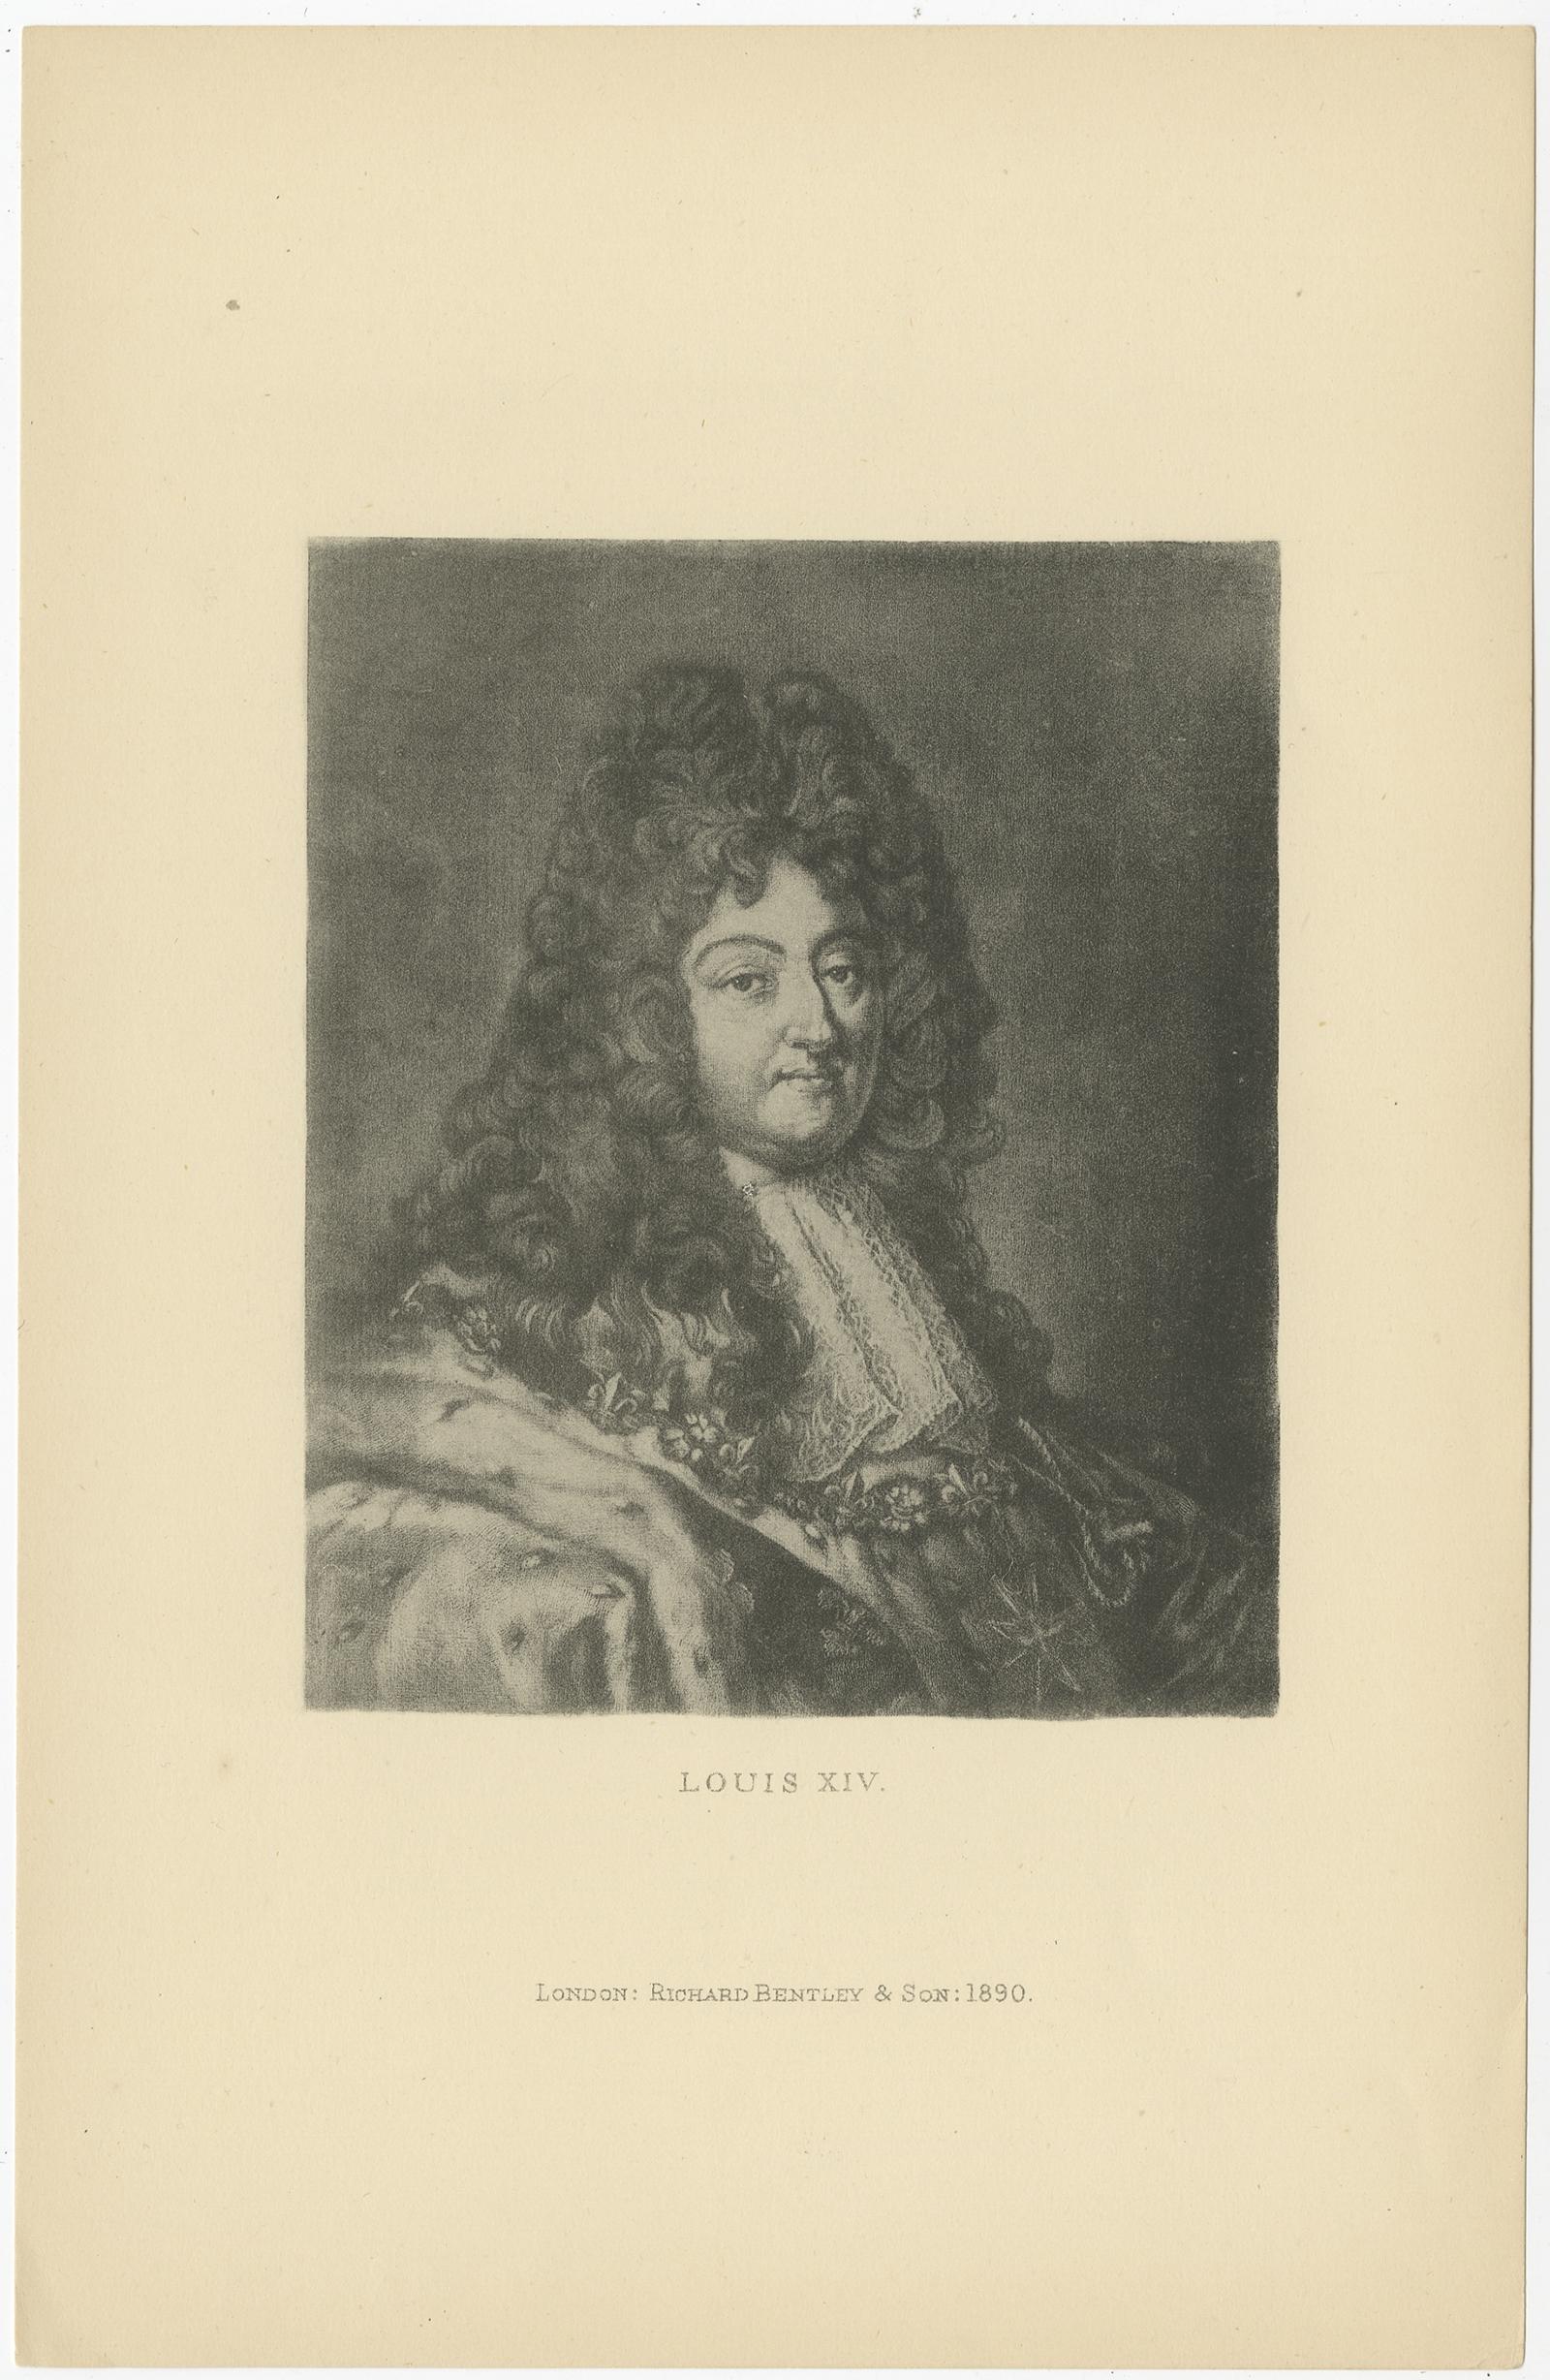 Antique portrait titled 'Louis XIV'. 

Portrait of Louis XIV, known as Louis the Great (Louis le Grand) or the Sun King (Roi Soleil), he was a monarch of the House of Bourbon who reigned as King of France from 14 May 1643 until his death in